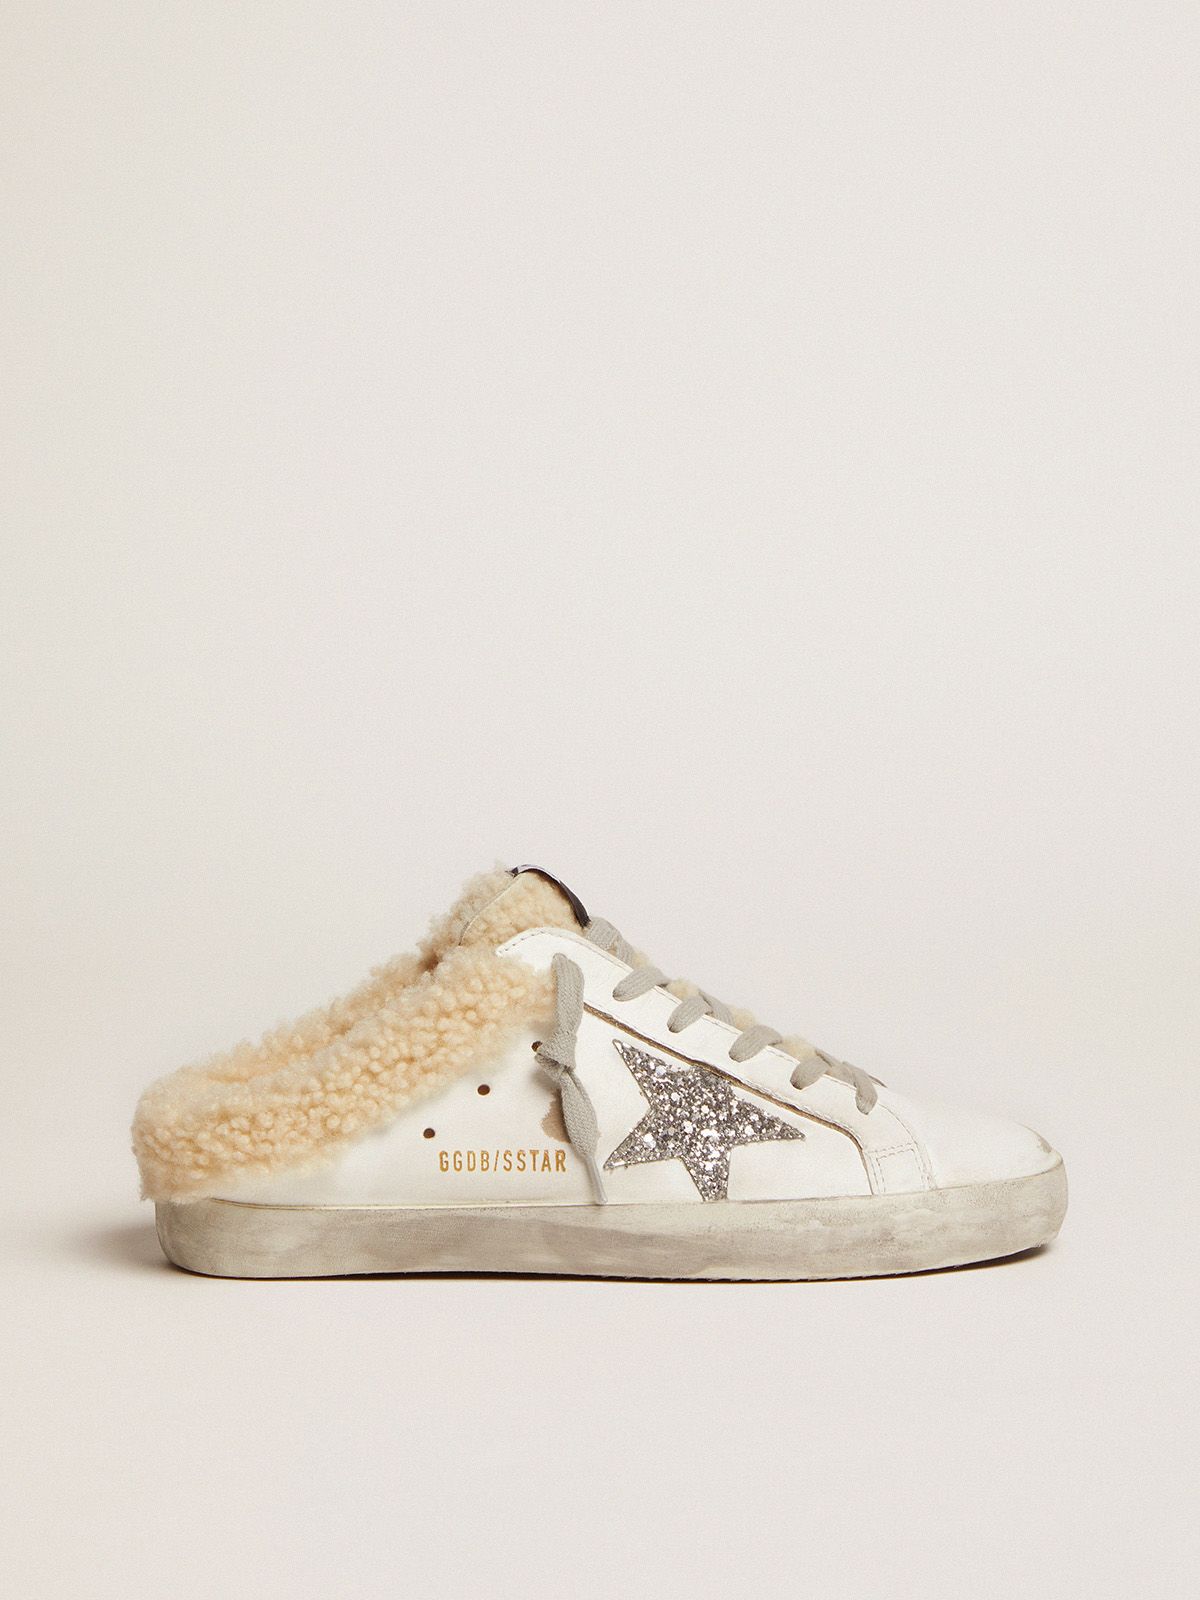 golden goose shearling and leather silver in Sabots Super-Star glitter white lining star with